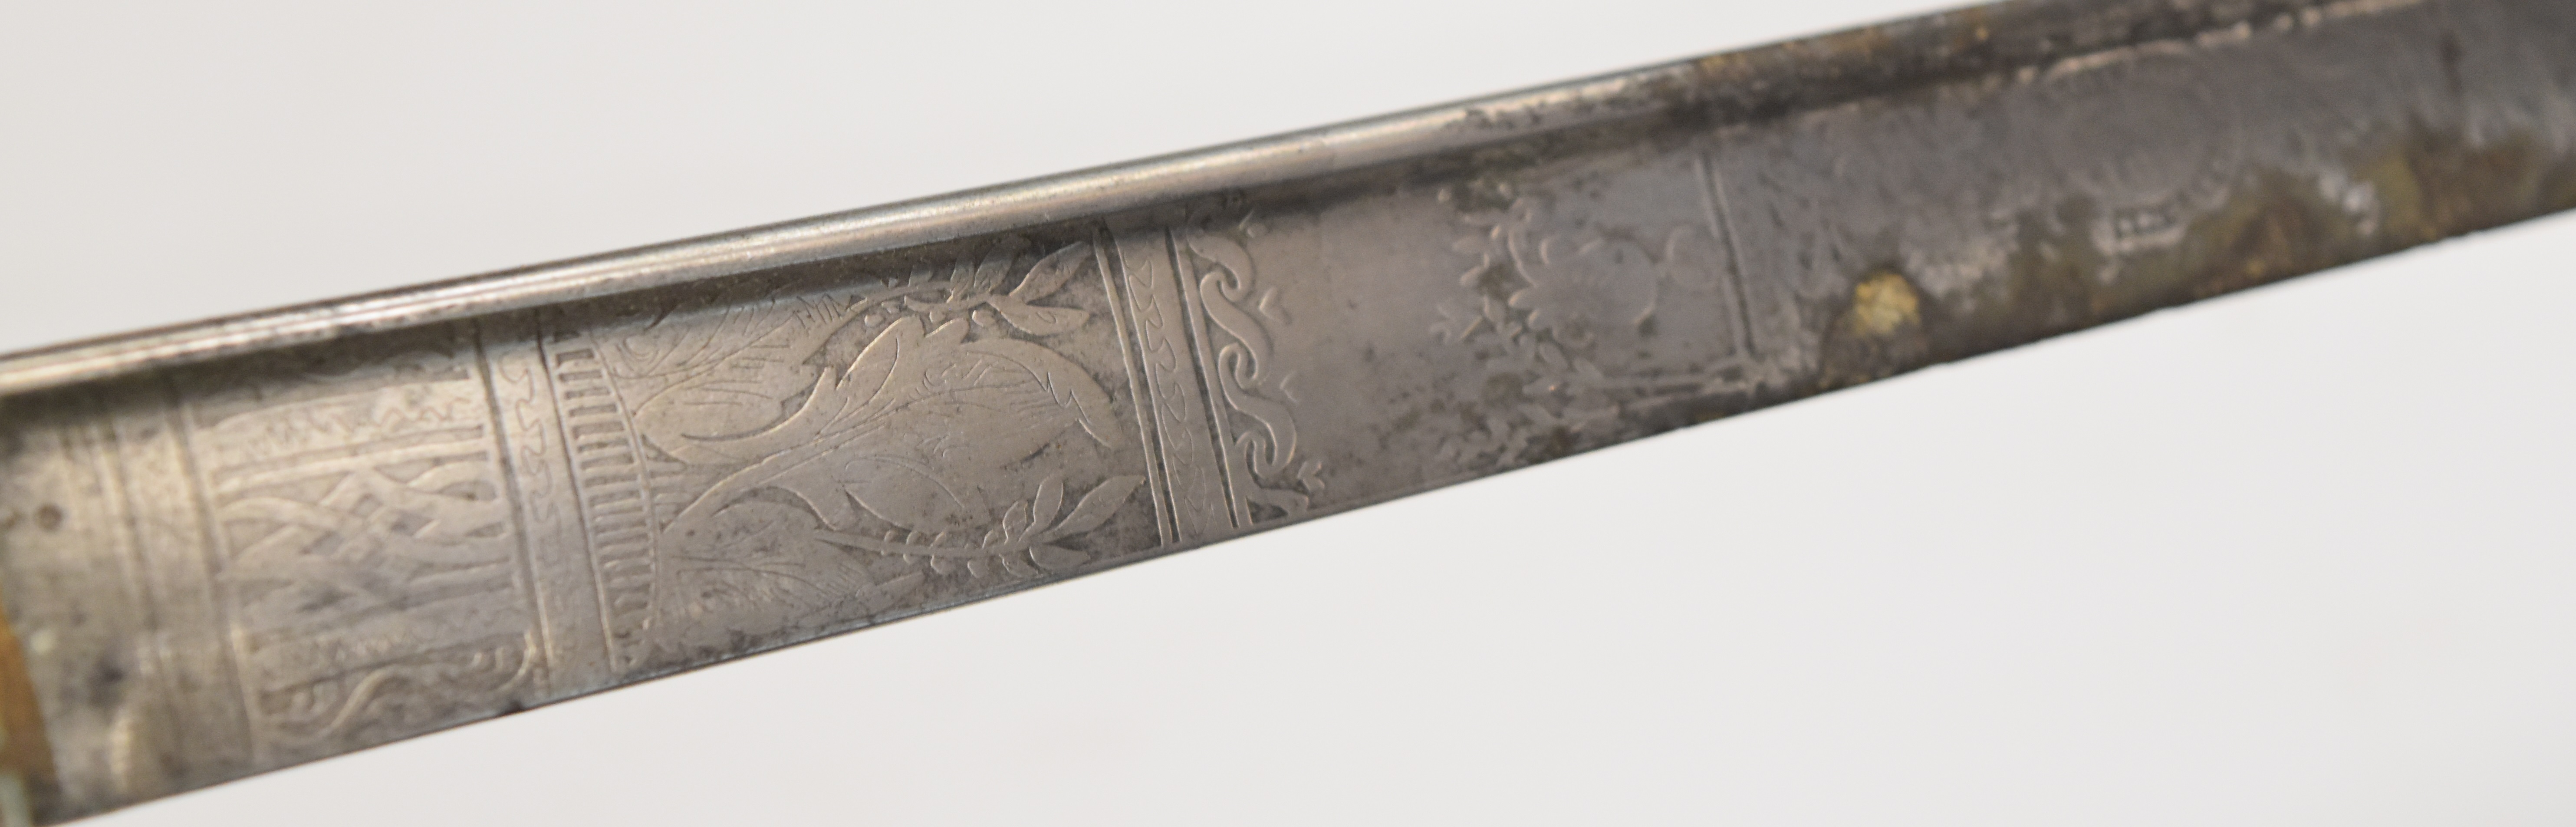 Royal Navy 1827 pattern sword with lion head pommel, folding inner guard and fouled anchor motif, - Image 6 of 11